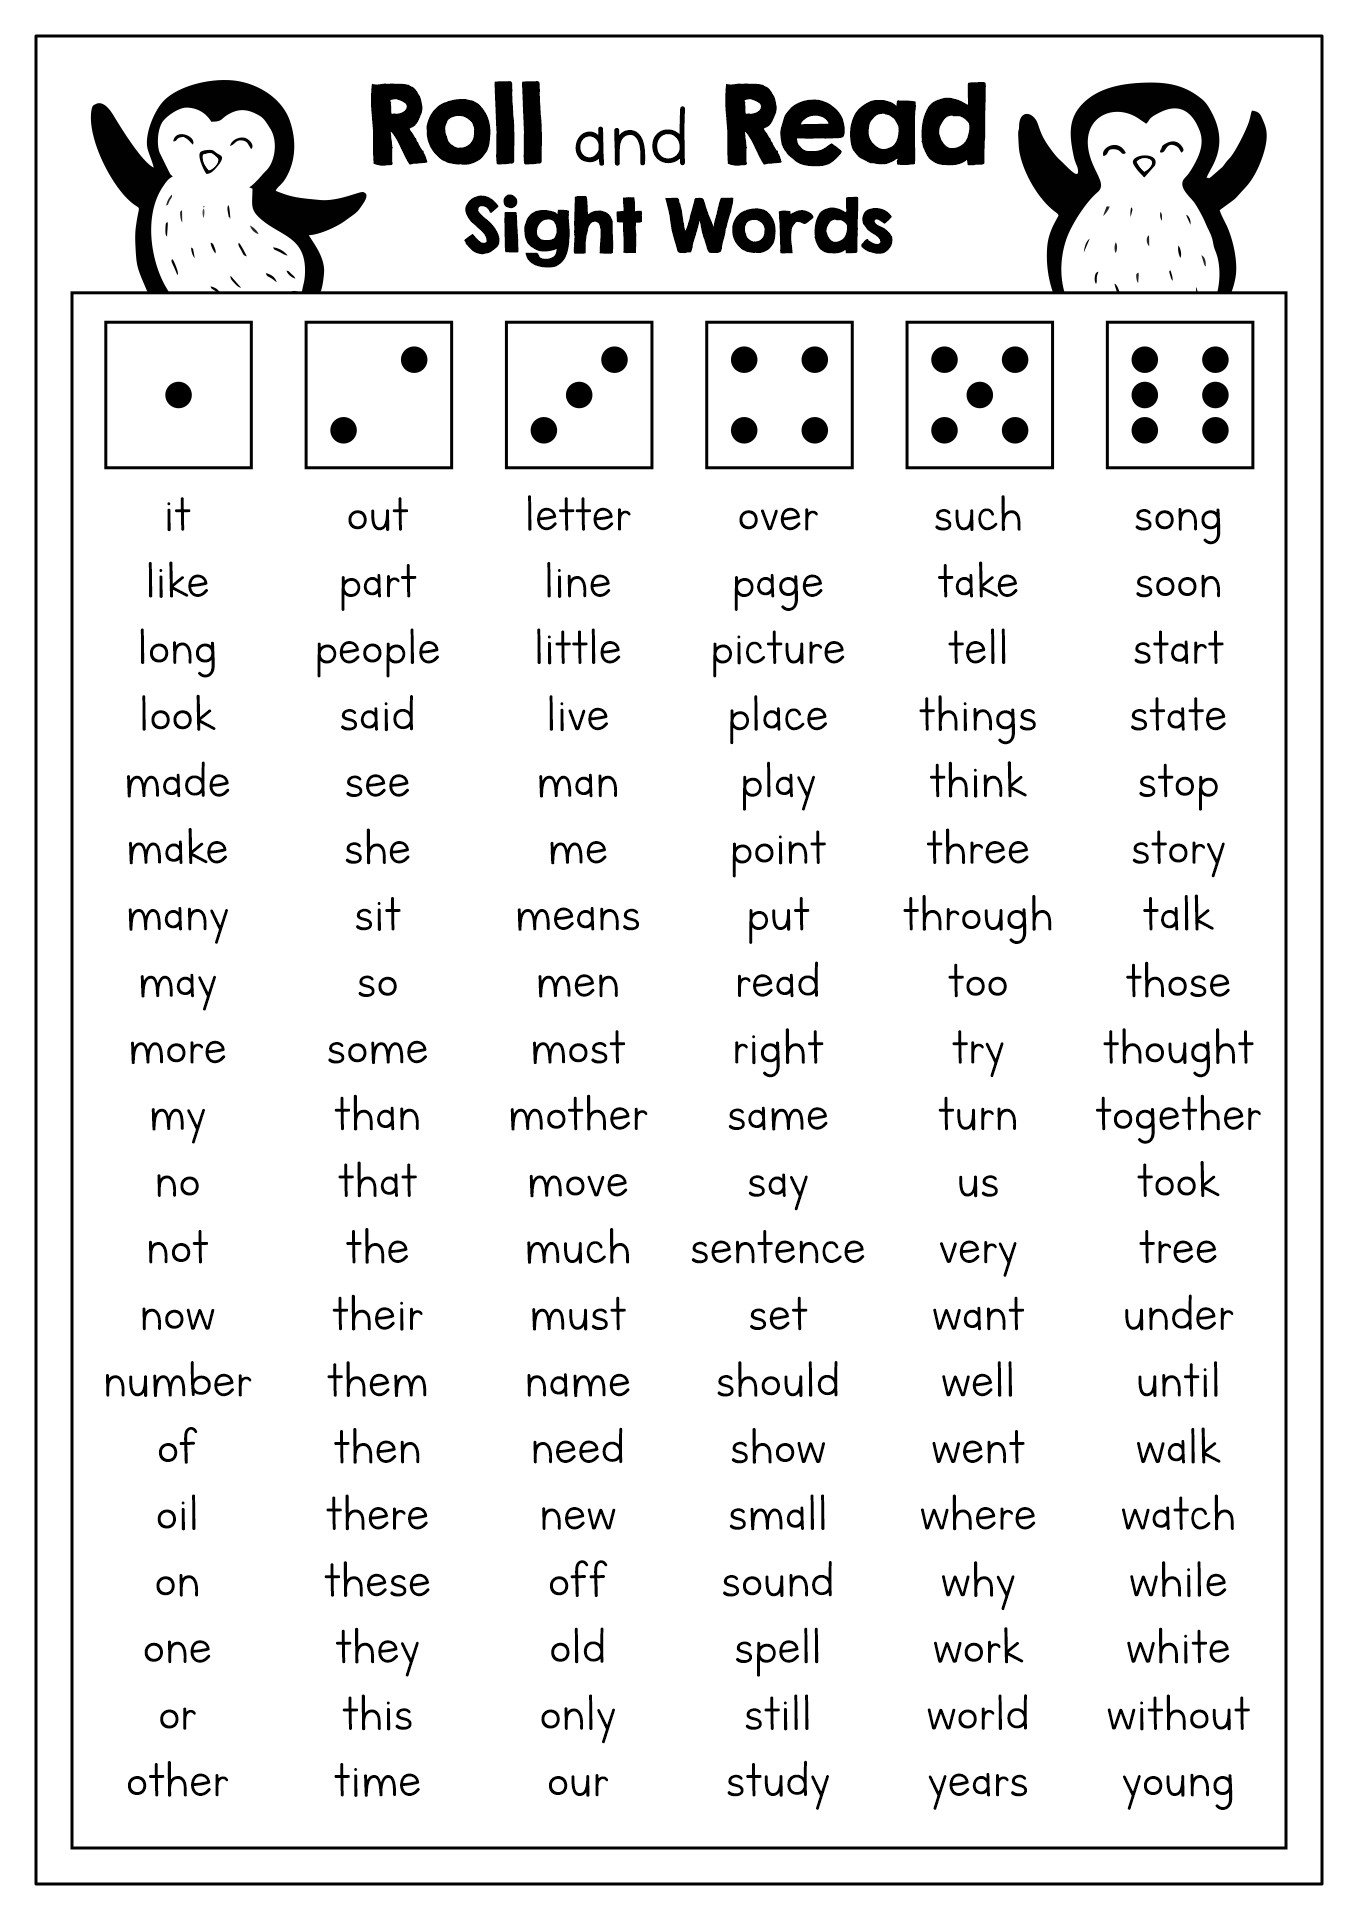 Roll and Read Sight Words Fry